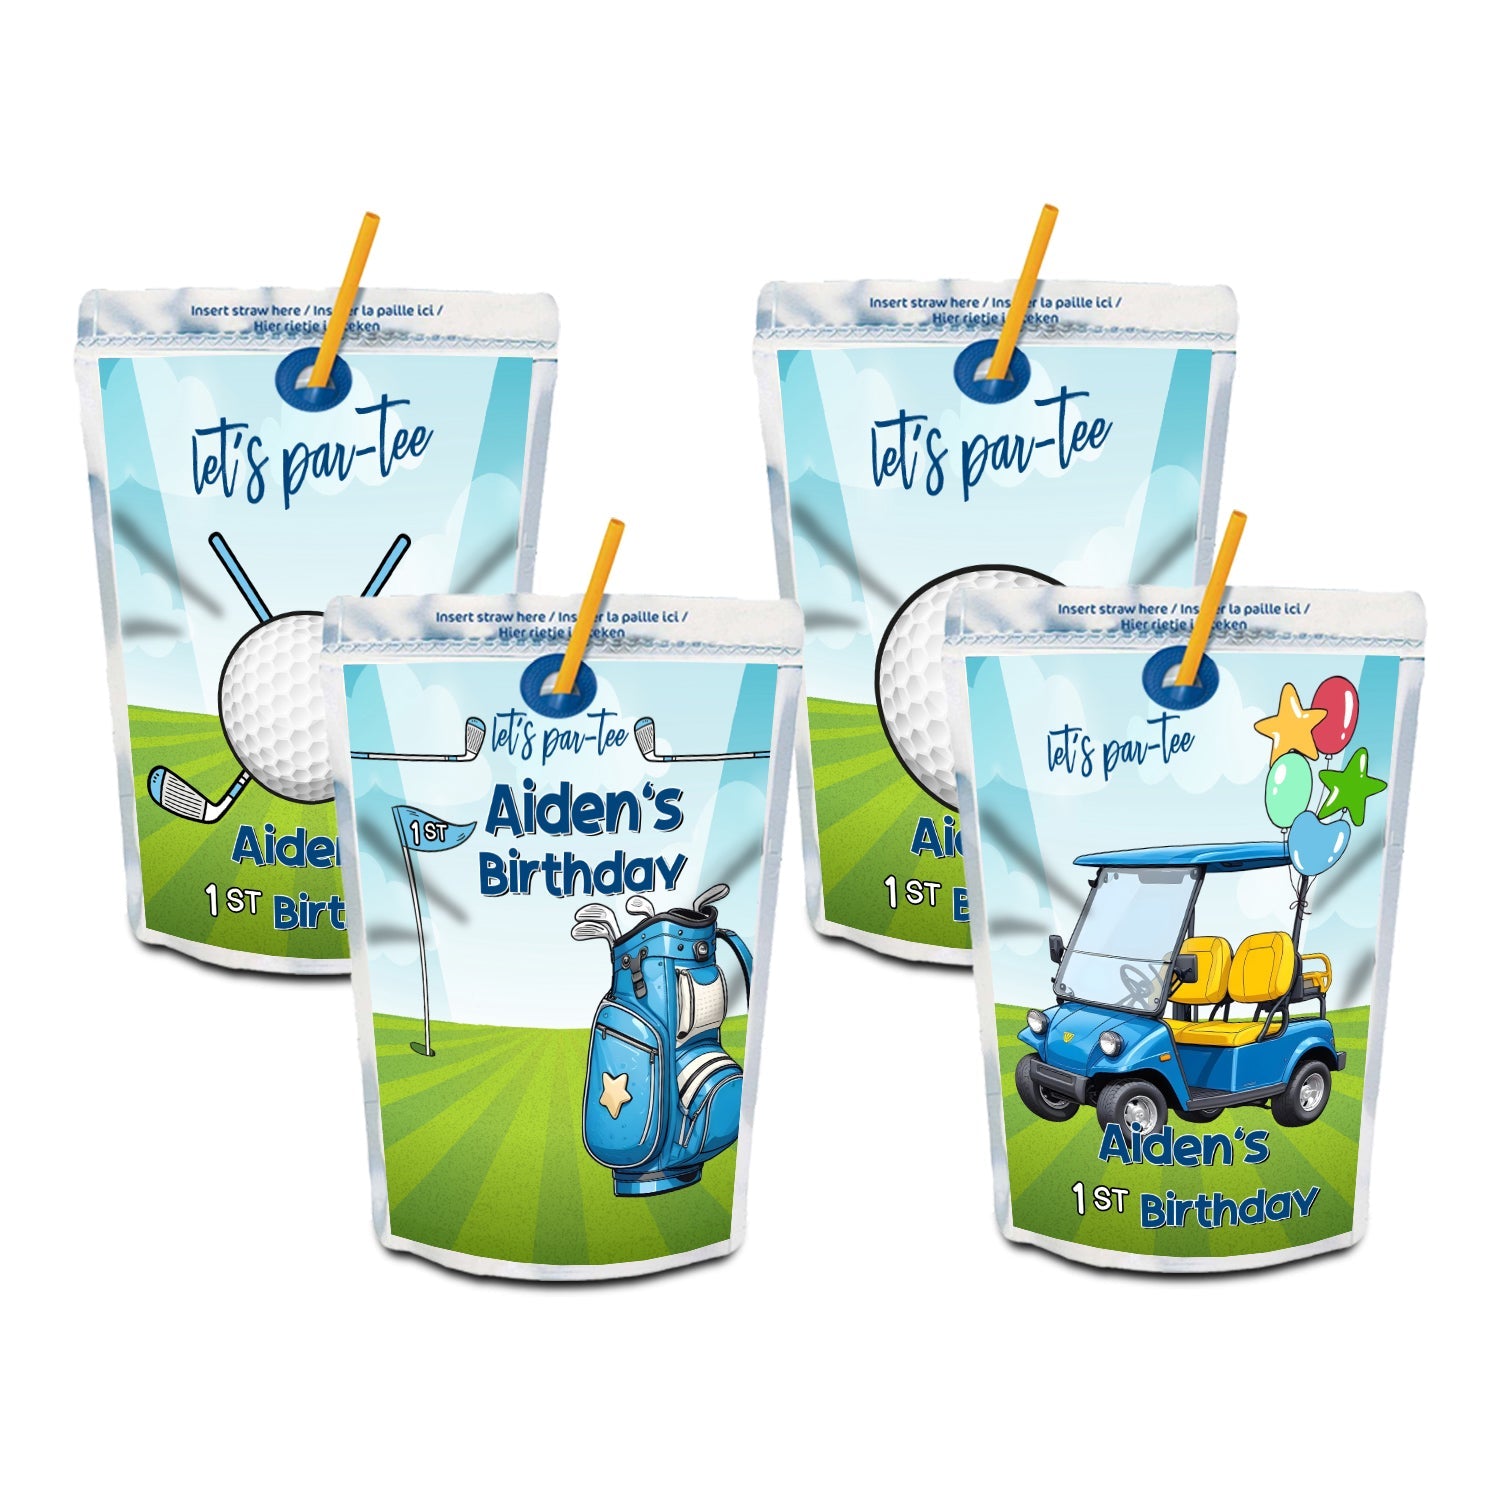 Mini Golf Juice Pouch Label: Tailored juice pouch labels with mini golf course imagery